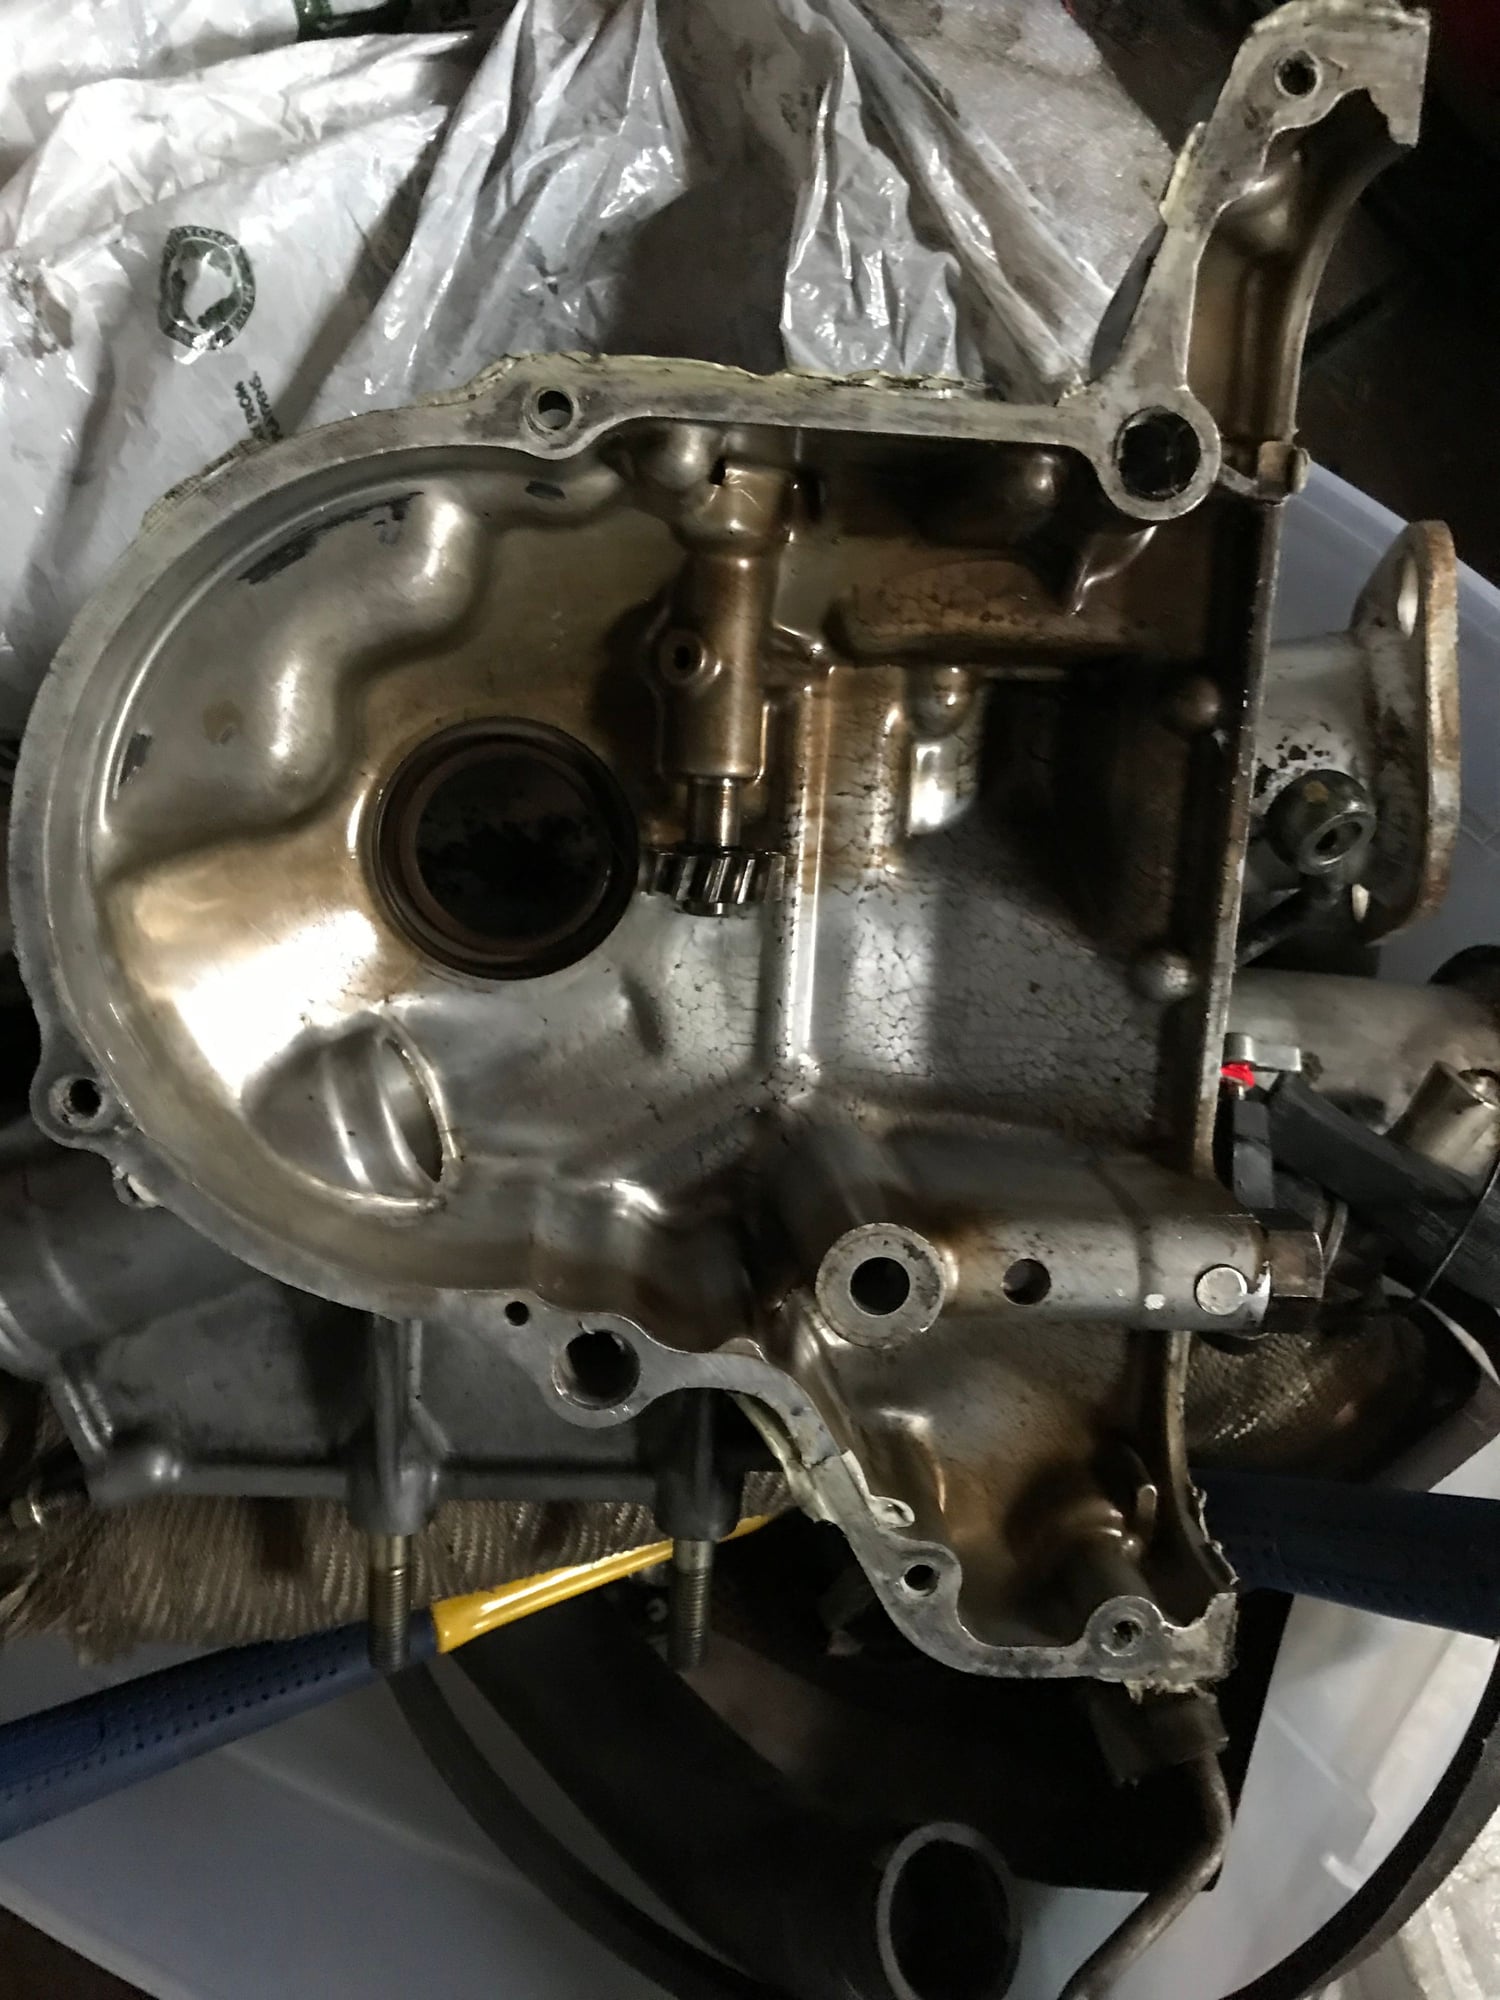 Engine - Internals - Turbo 2 series 5 parts - Used - 1986 to 1991 Mazda RX-7 - Saint Louis, MO 63114, United States